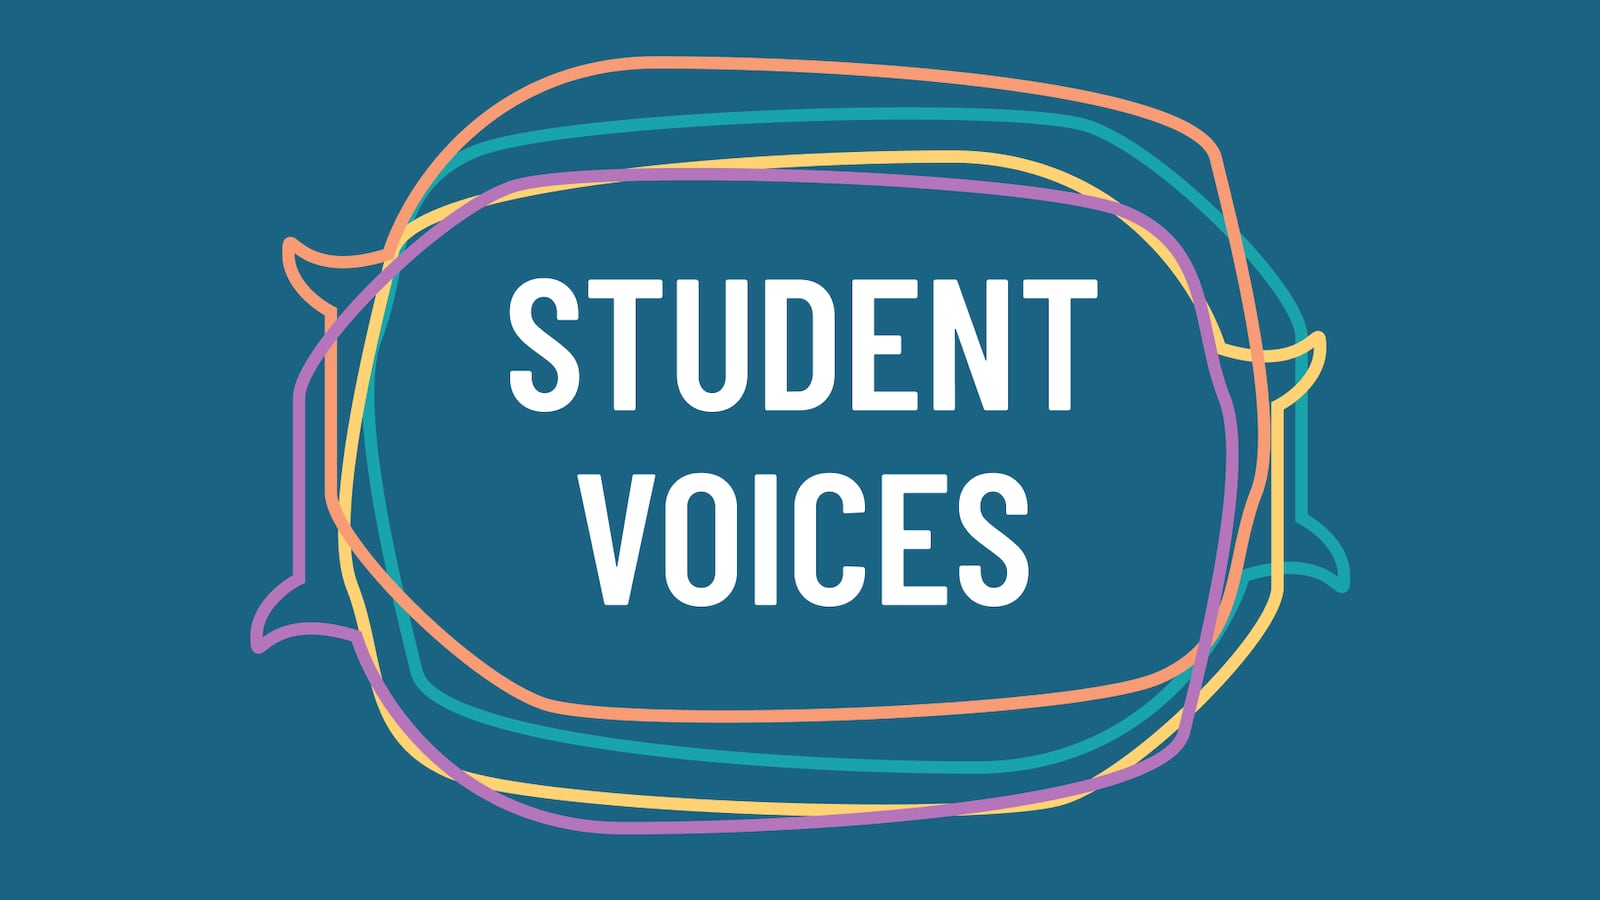 White text on a dark blue background reads: Student Voices. The text is surrounded by overlapping speech bubbles.